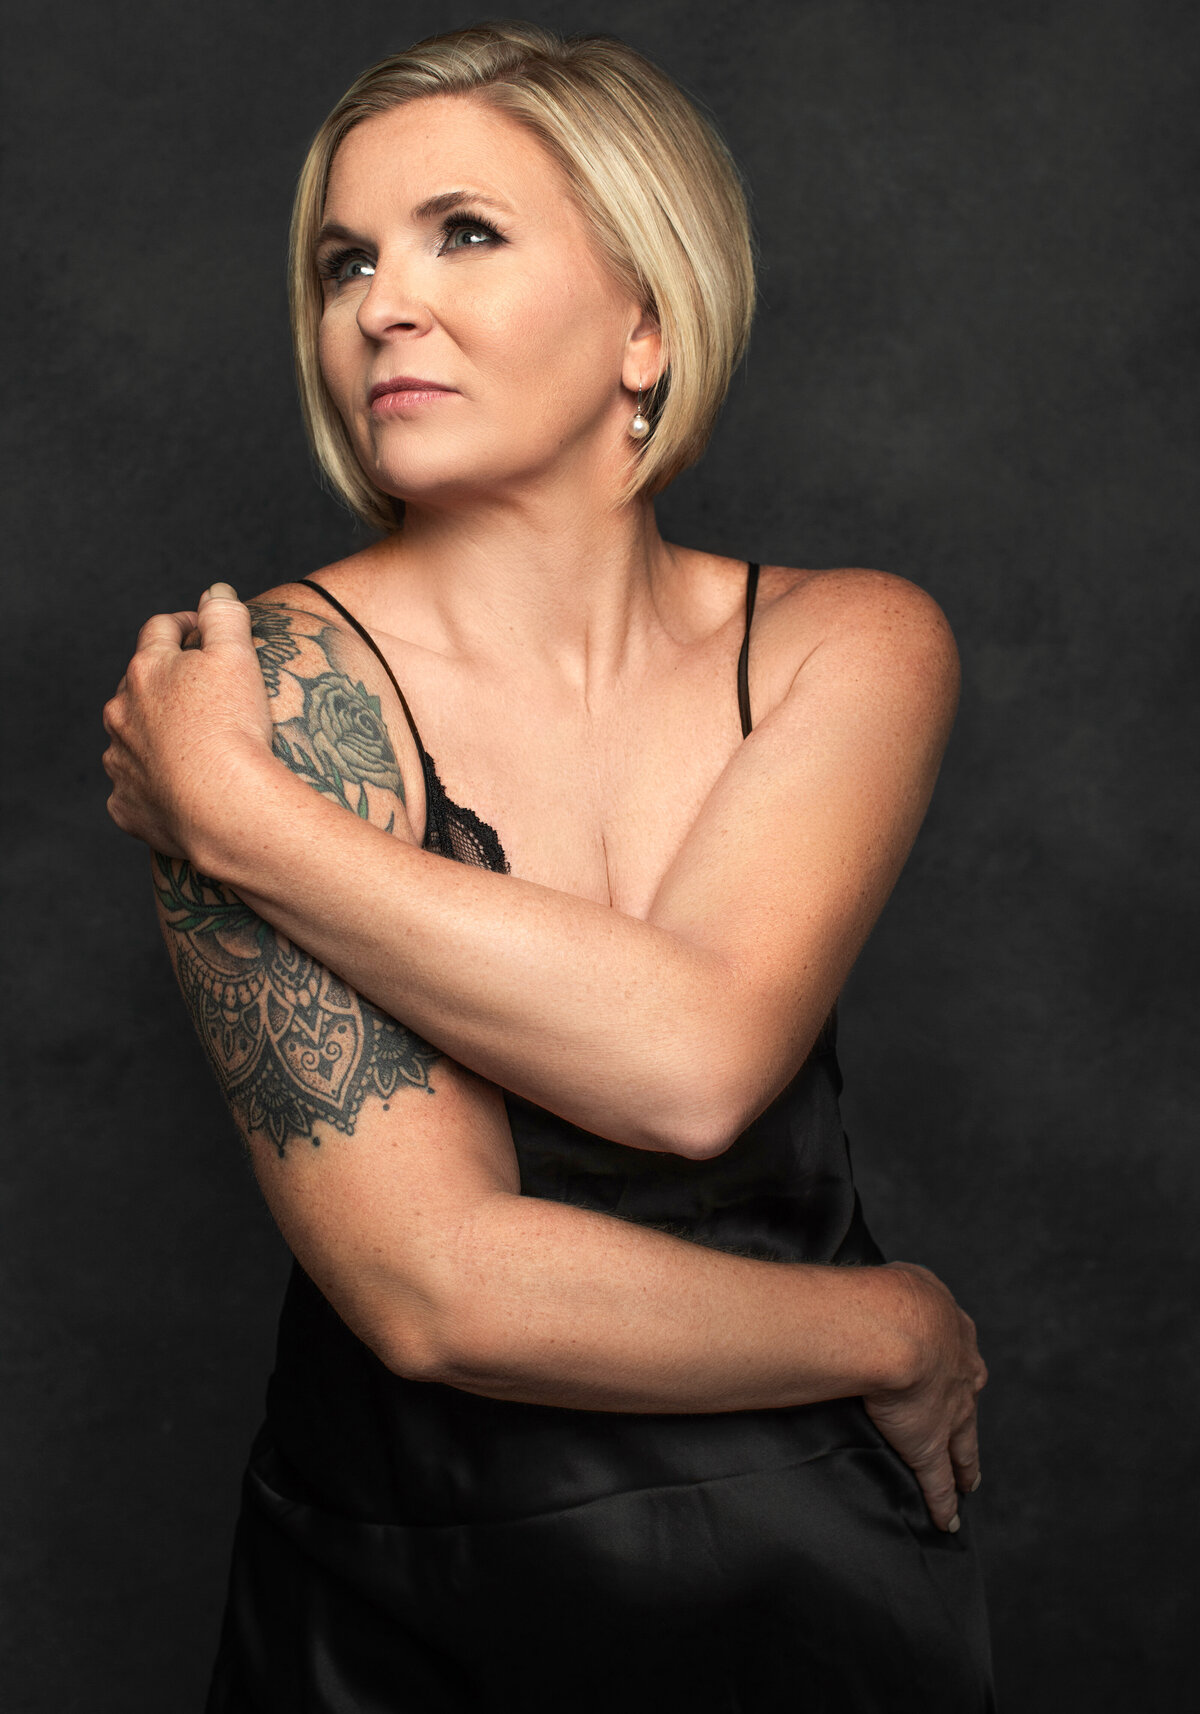 A woman with a blond pixie cut hairstyle embraces herself while wearing a black dress as she poses for a portrait photo at Janel Lee Photography studios in Cincinnati Ohio